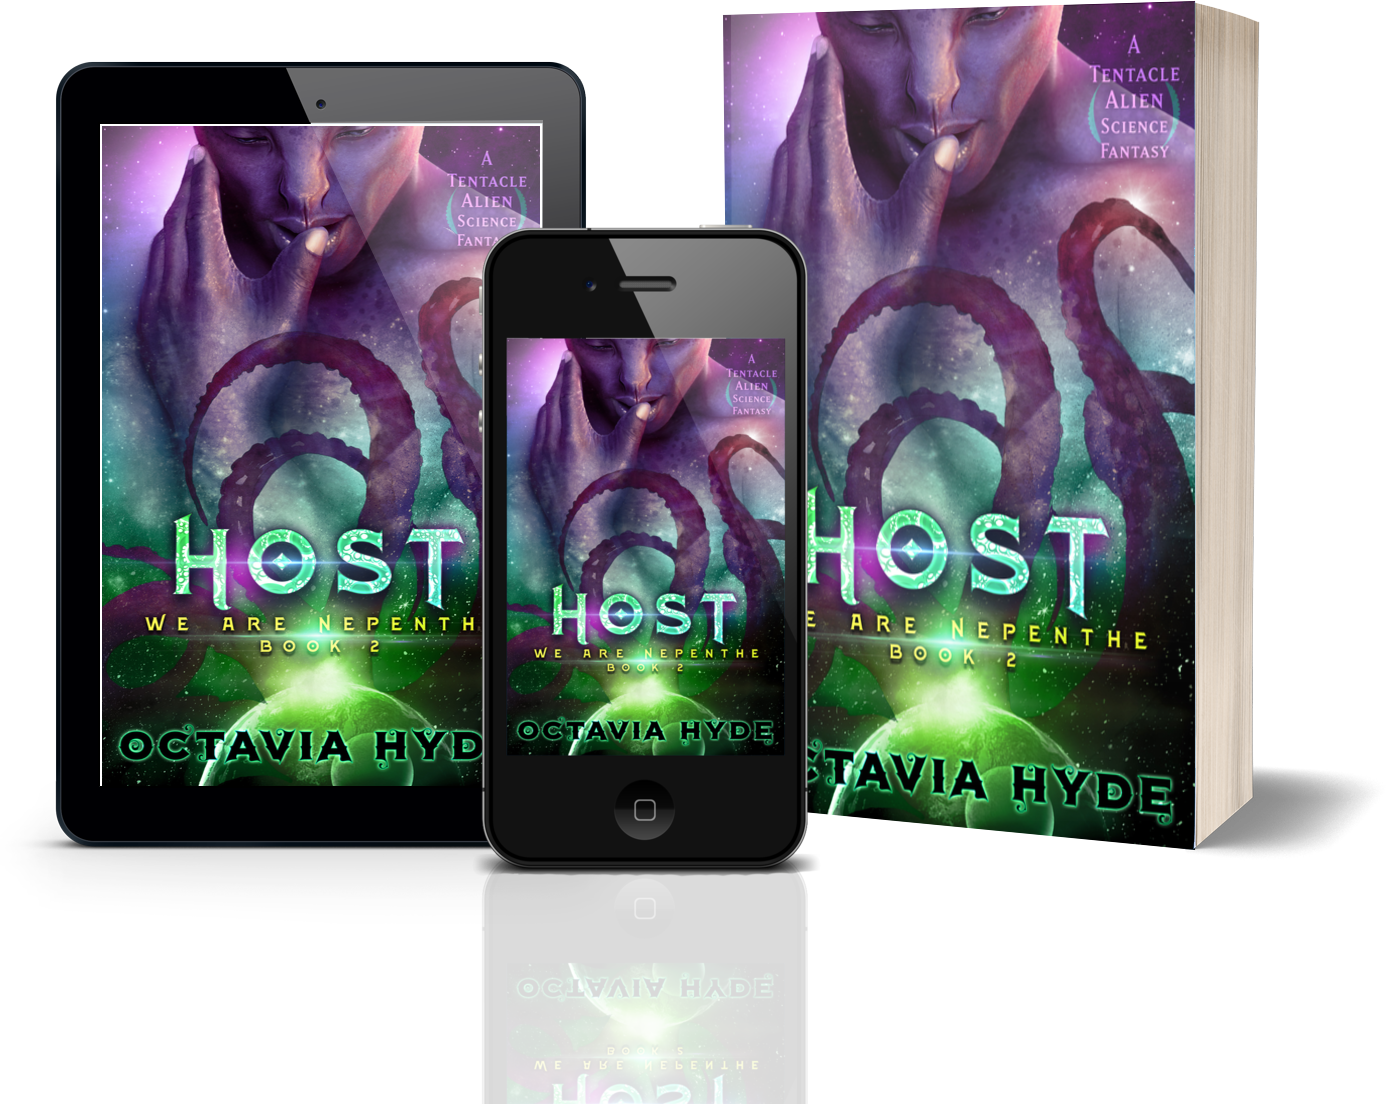 Host by Octavia Hyde, displayed in e-reader, phone, and paperback formats